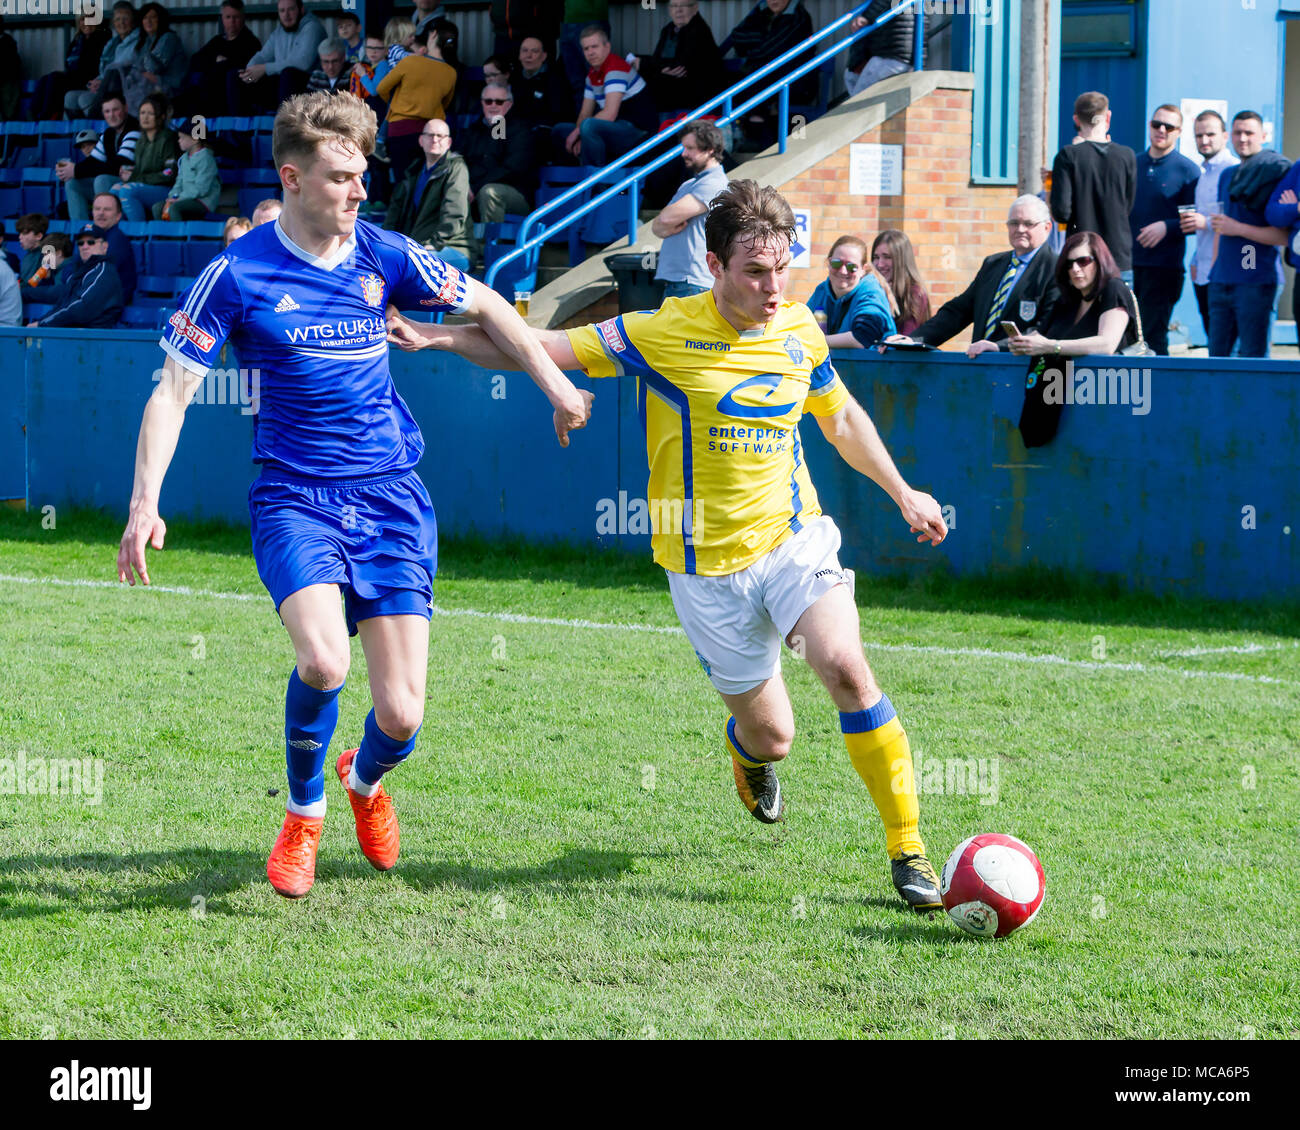 Farsley, UK, 14 April 2018. Warrington Town's Ged Kinsella chases the ball against Farsley Celtic during Warrington's 2-0 win on Saturday 14 April 2018 in the top of the table clash near the end of the season Credit: John Hopkins/Alamy Live News Credit: John Hopkins/Alamy Live News Stock Photo